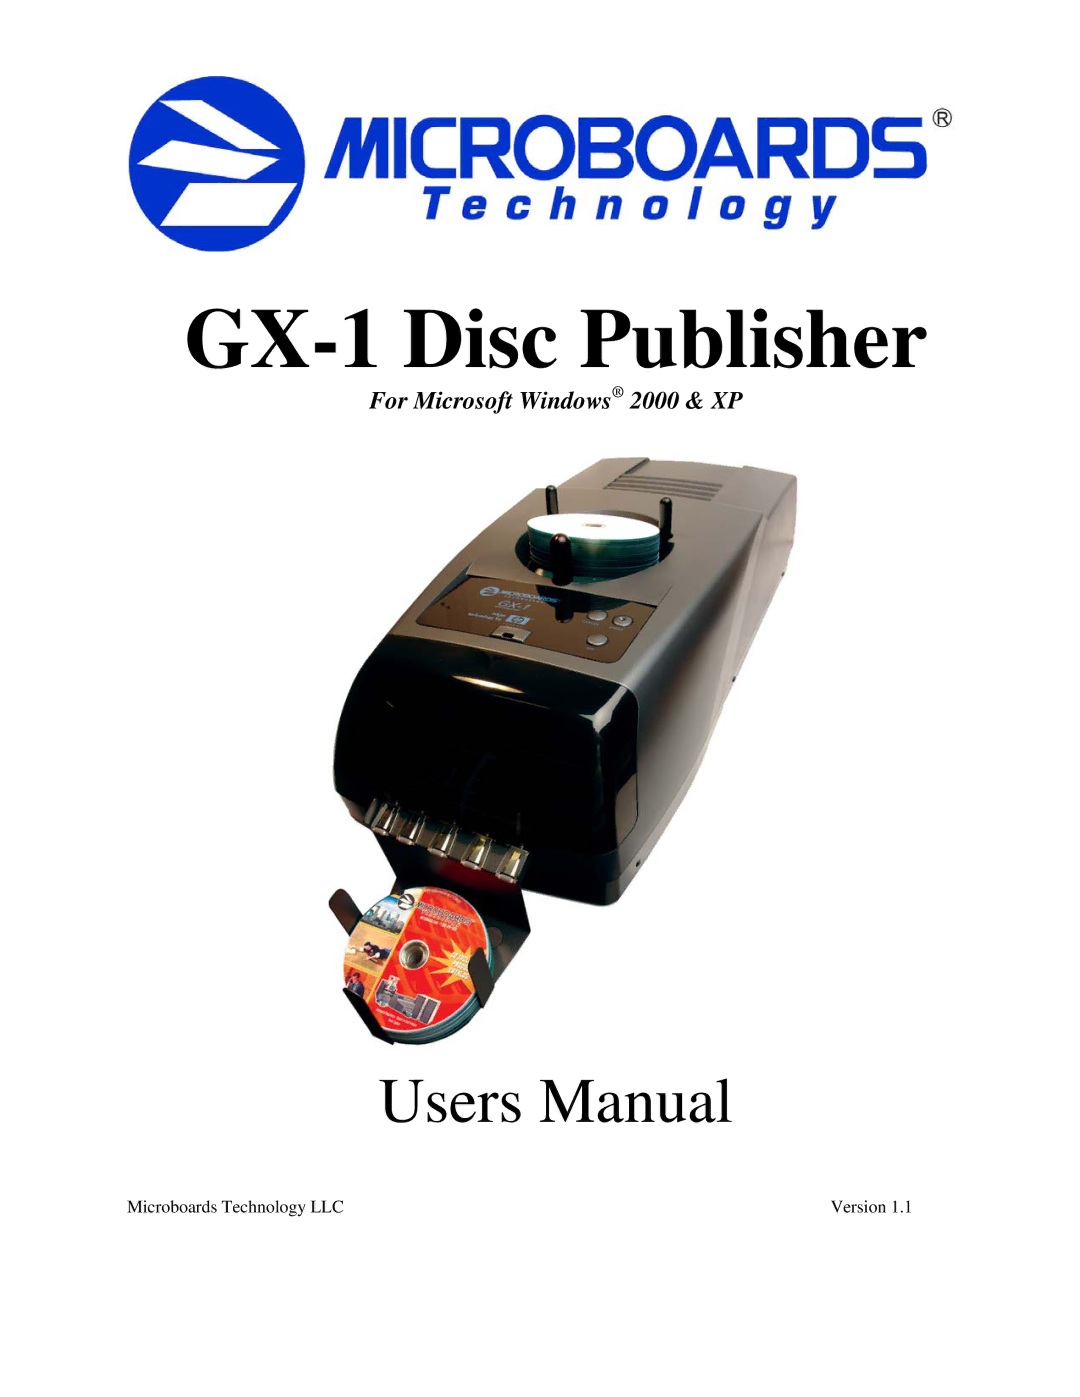 MicroBoards Technology user manual GX-1 Disc Publisher 